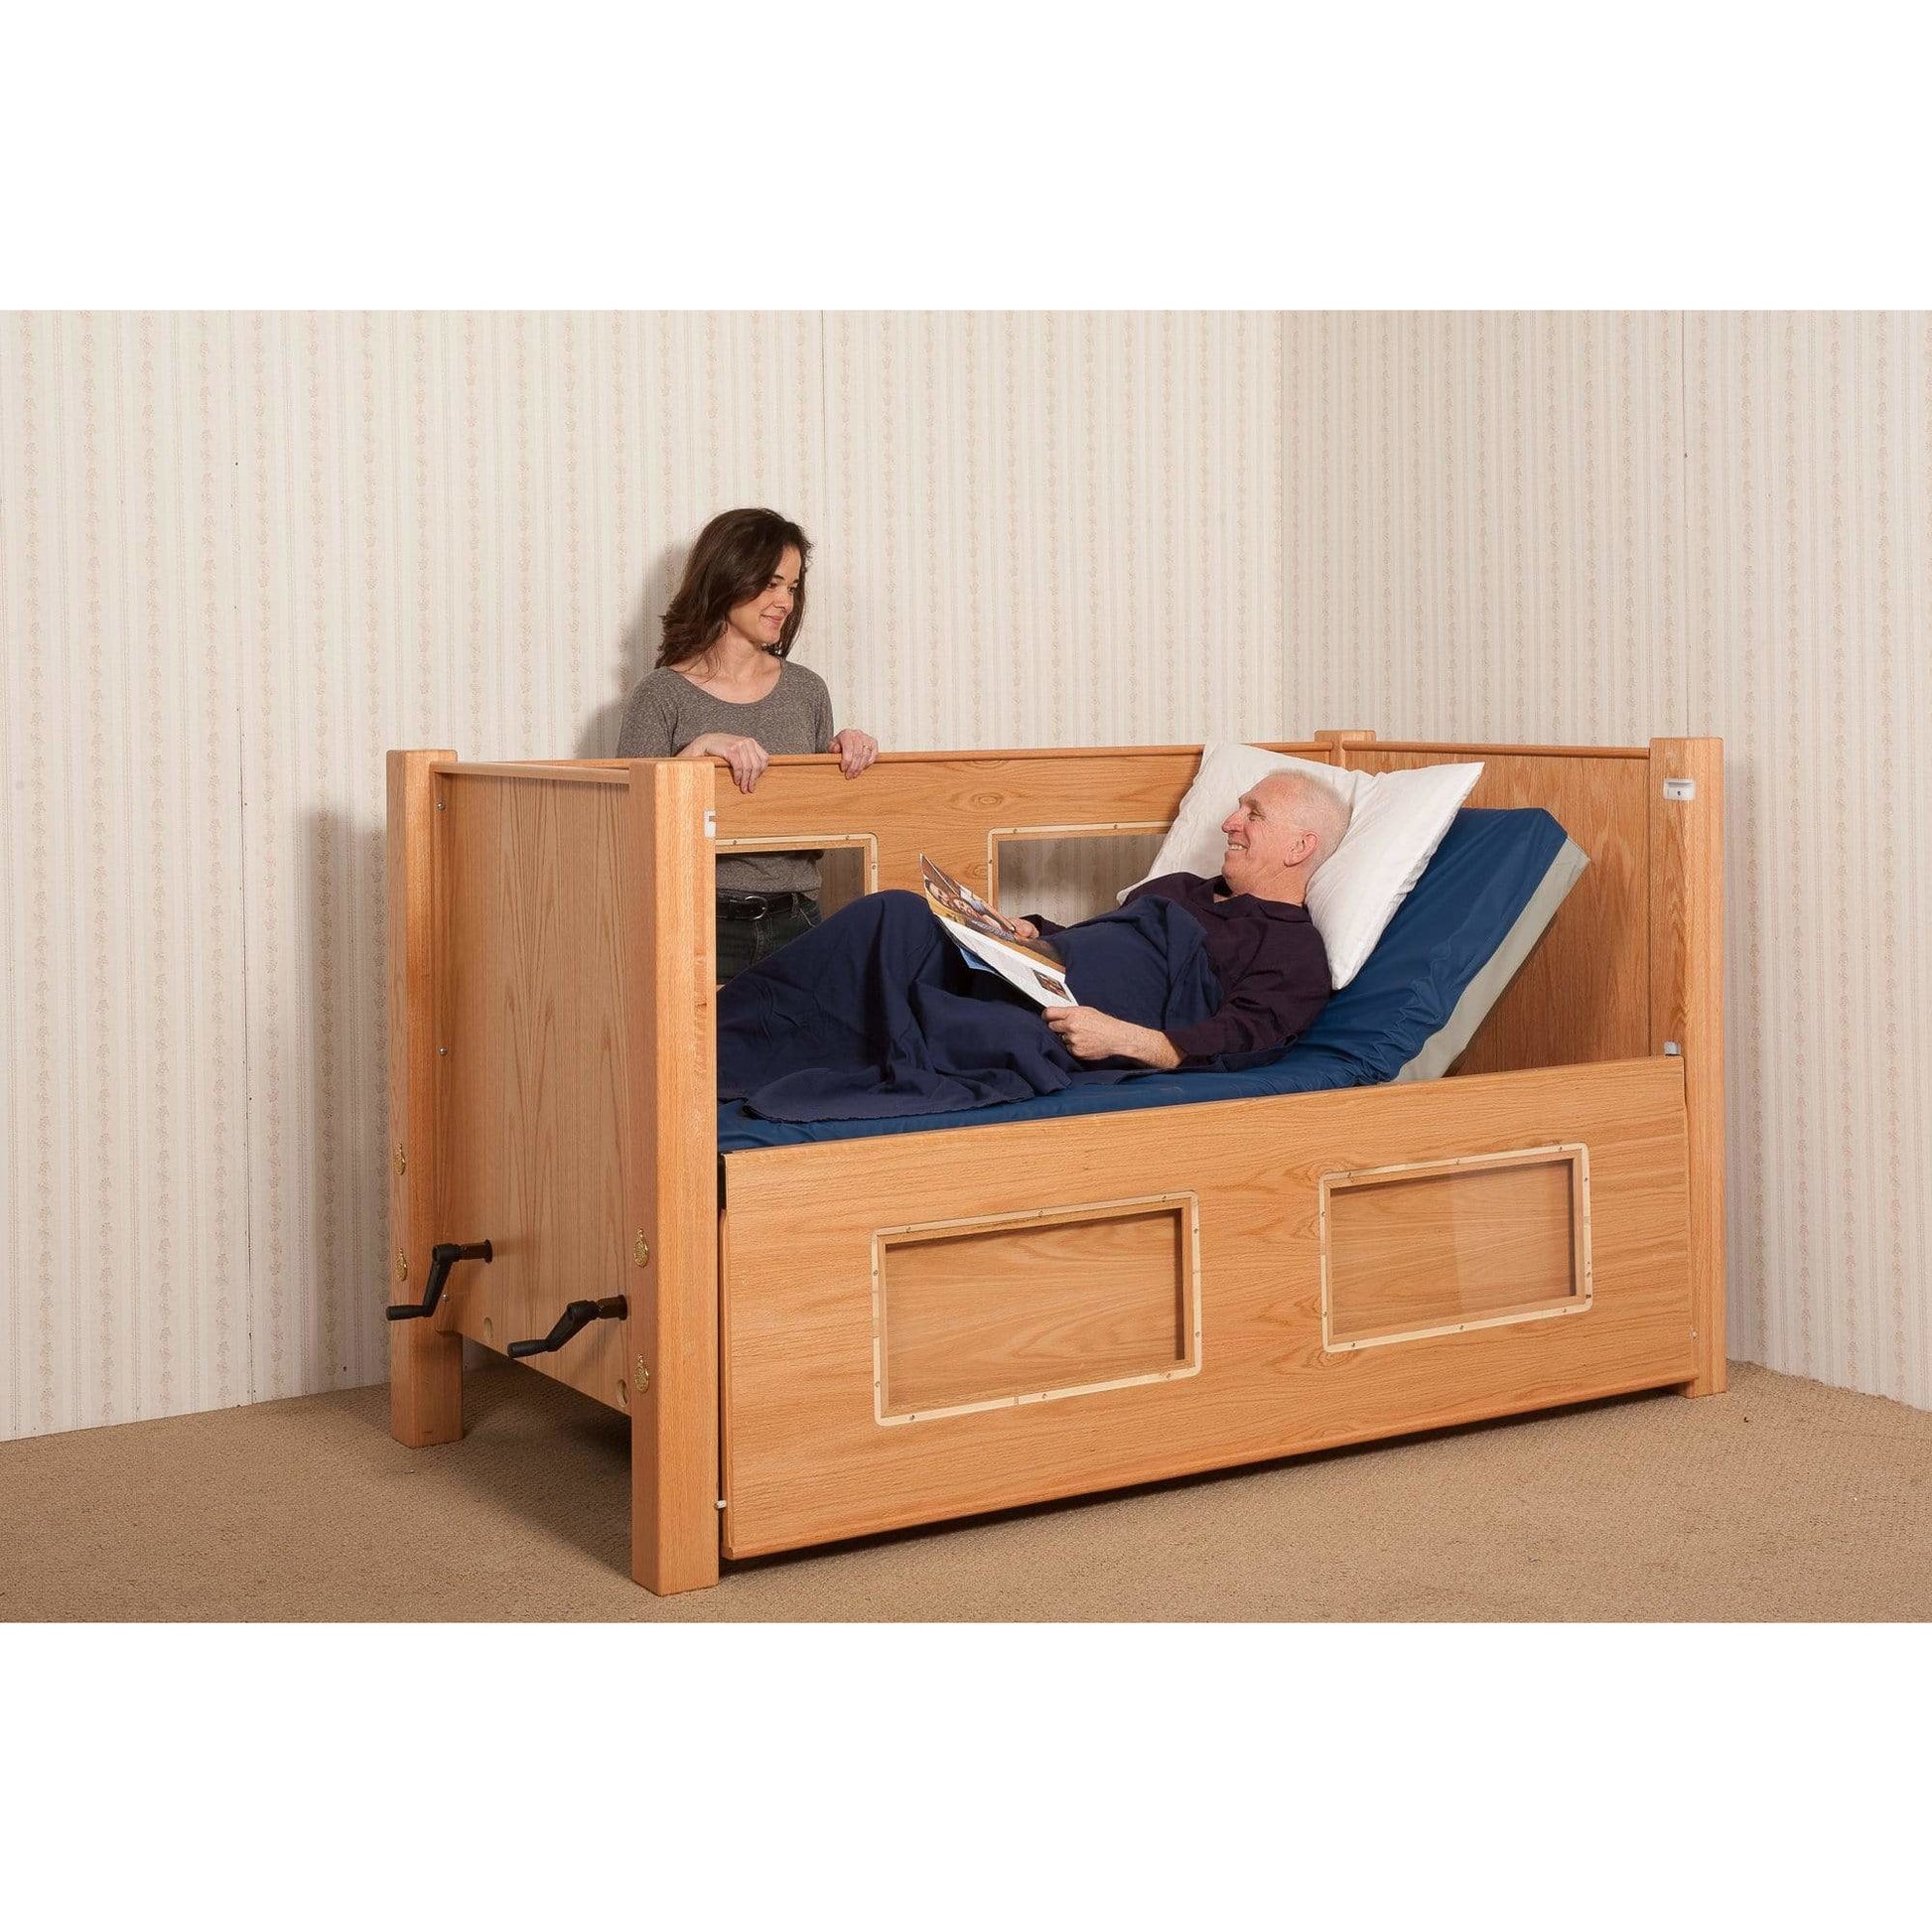 Beds by George Made to order Slumber Series Twin Size Bed With Manual Adjustable Head And Foot BBG-SS150-D